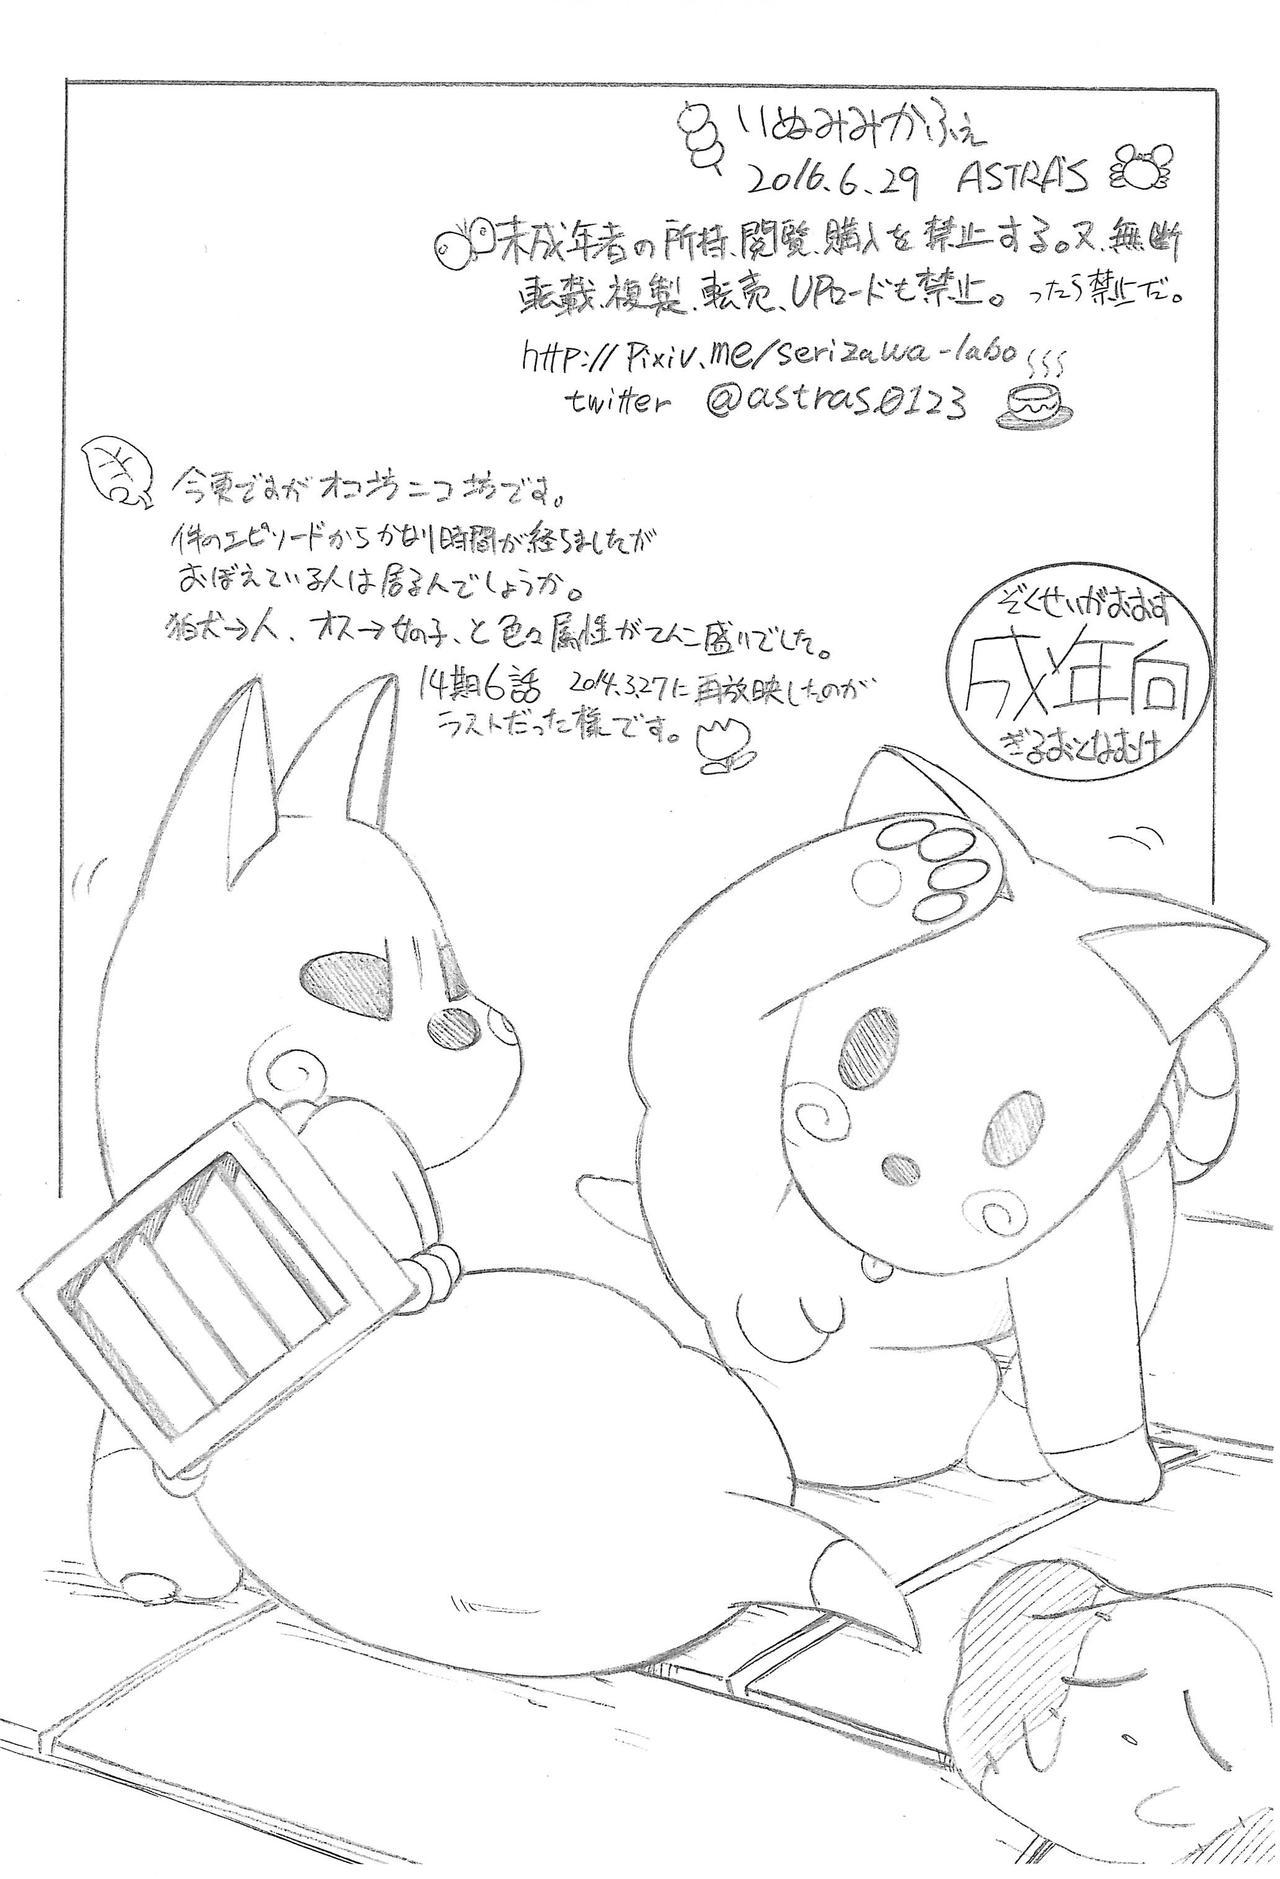 Behind Inumimi Cafe Assfucked - Page 11